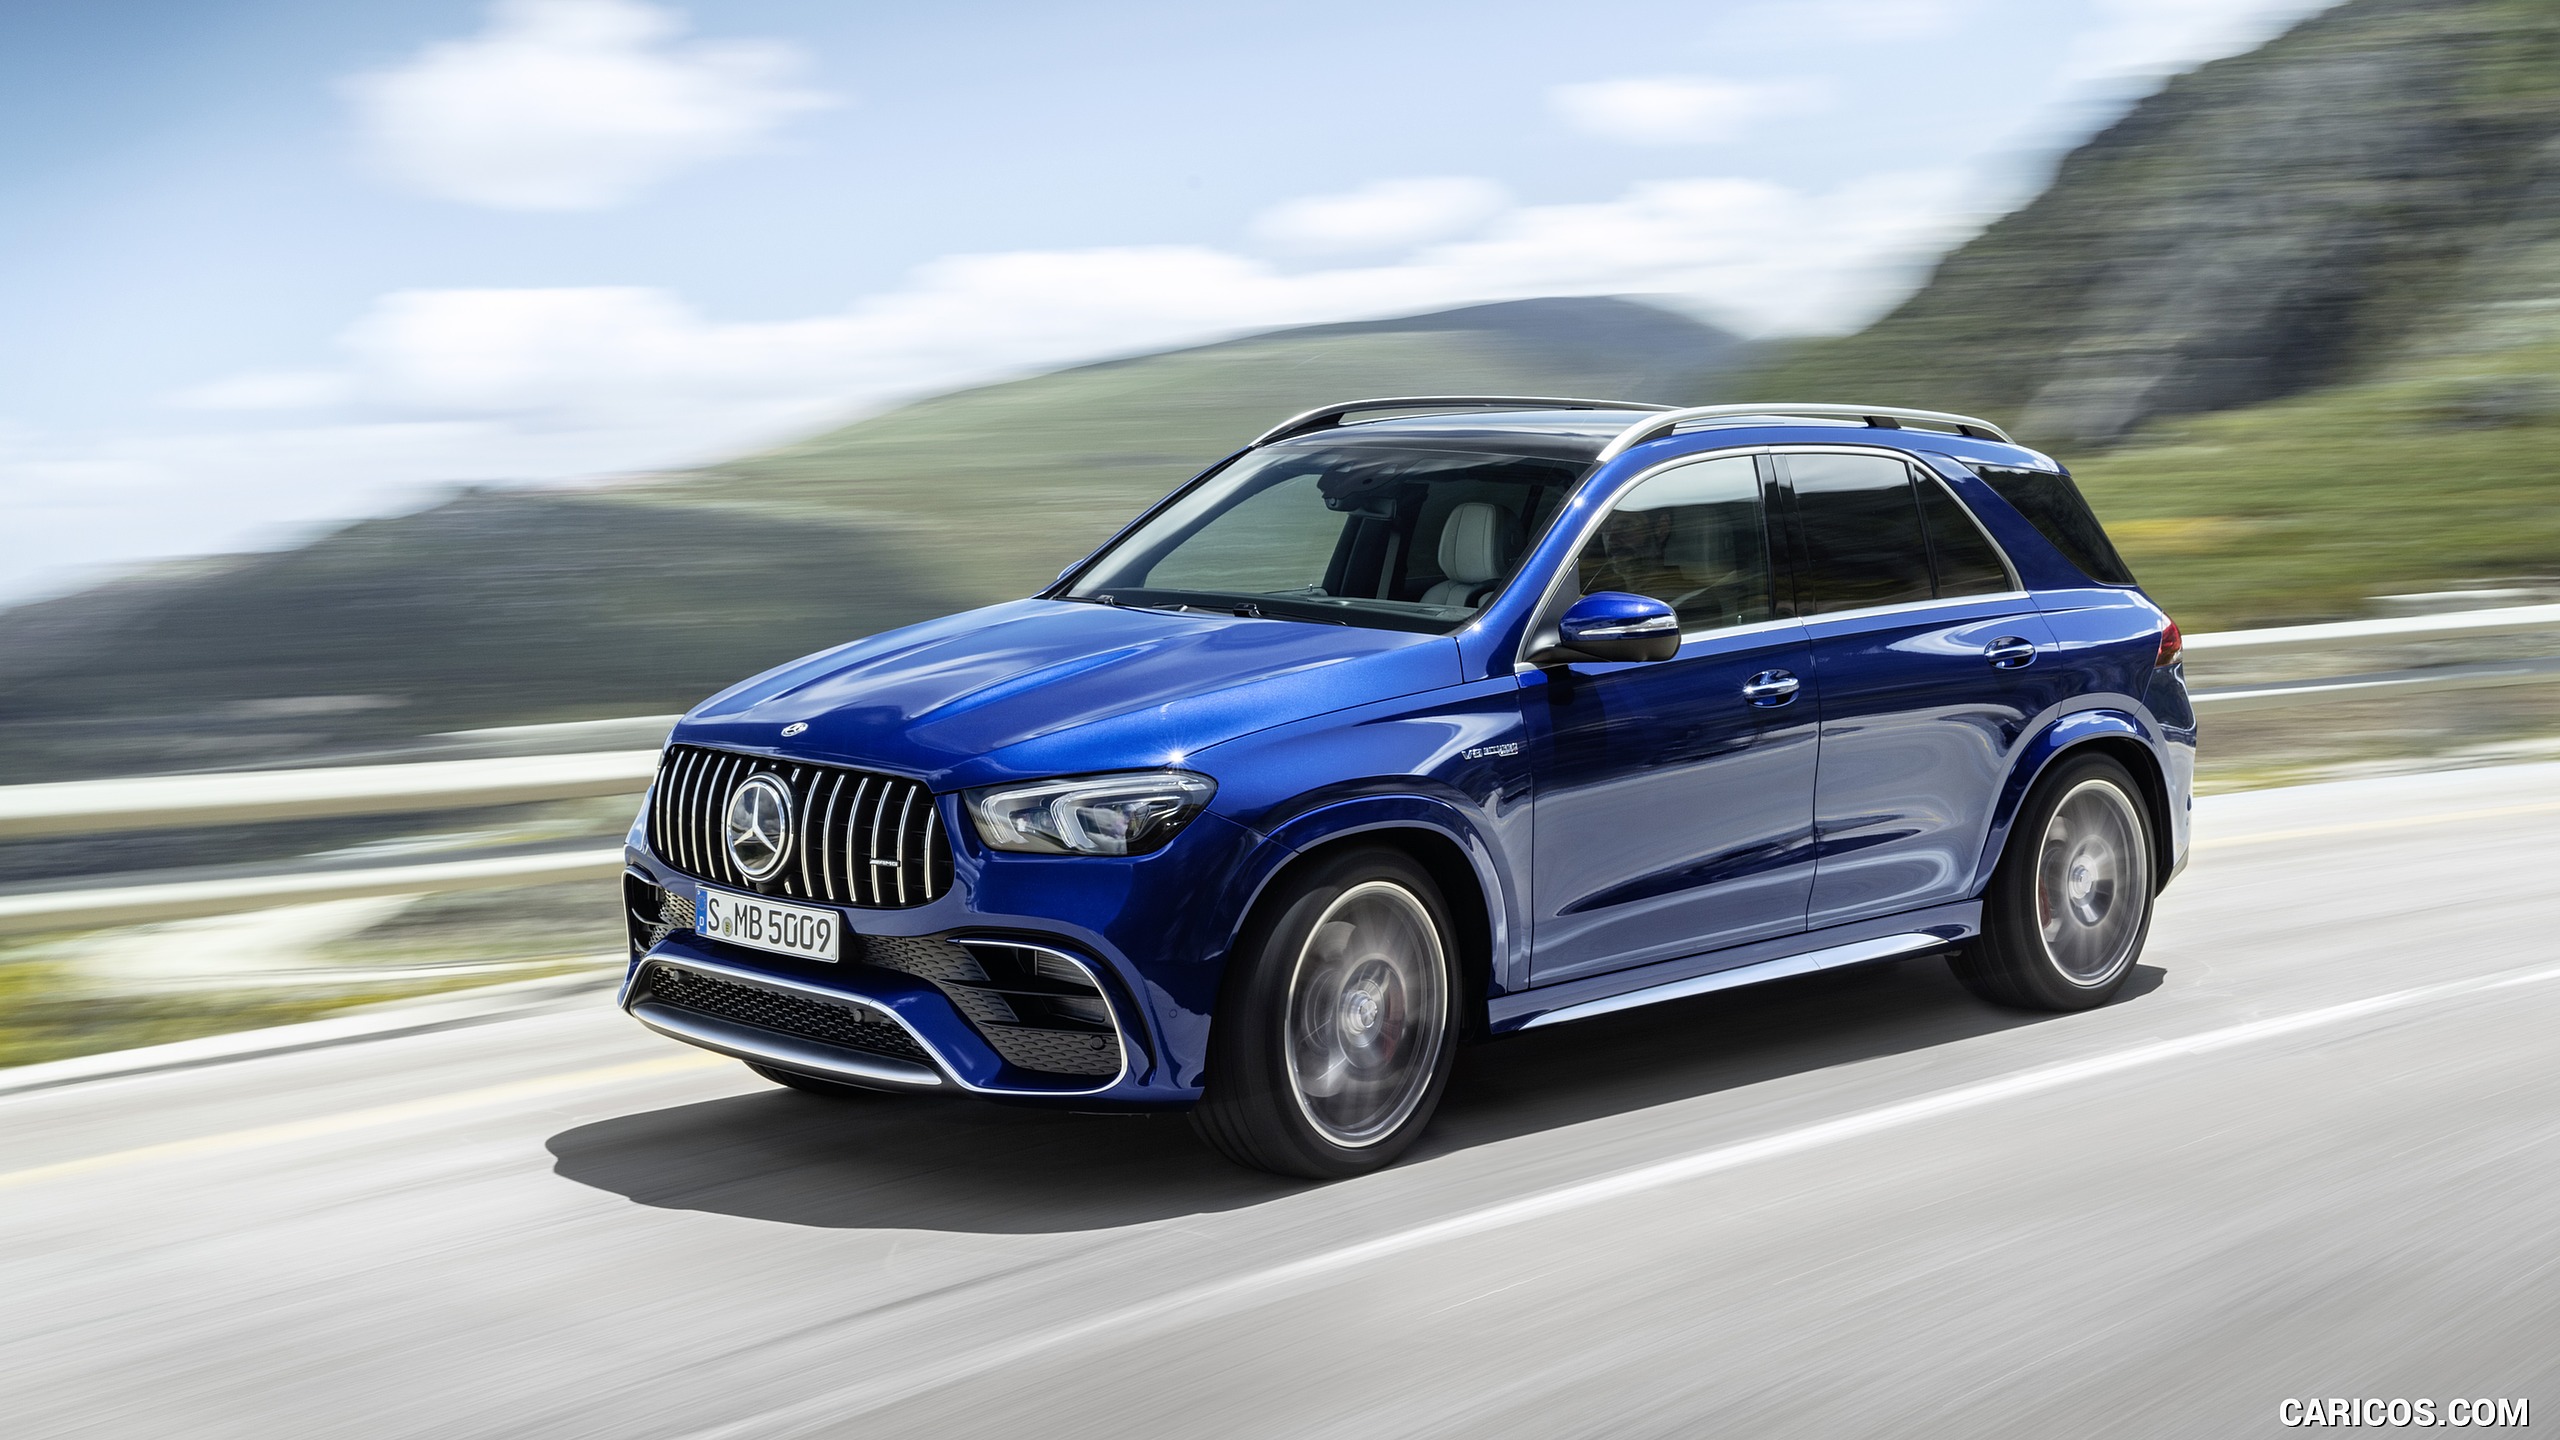 2021 Mercedes-AMG GLE 63 S 4MATIC - Front Three-Quarter, #3 of 187